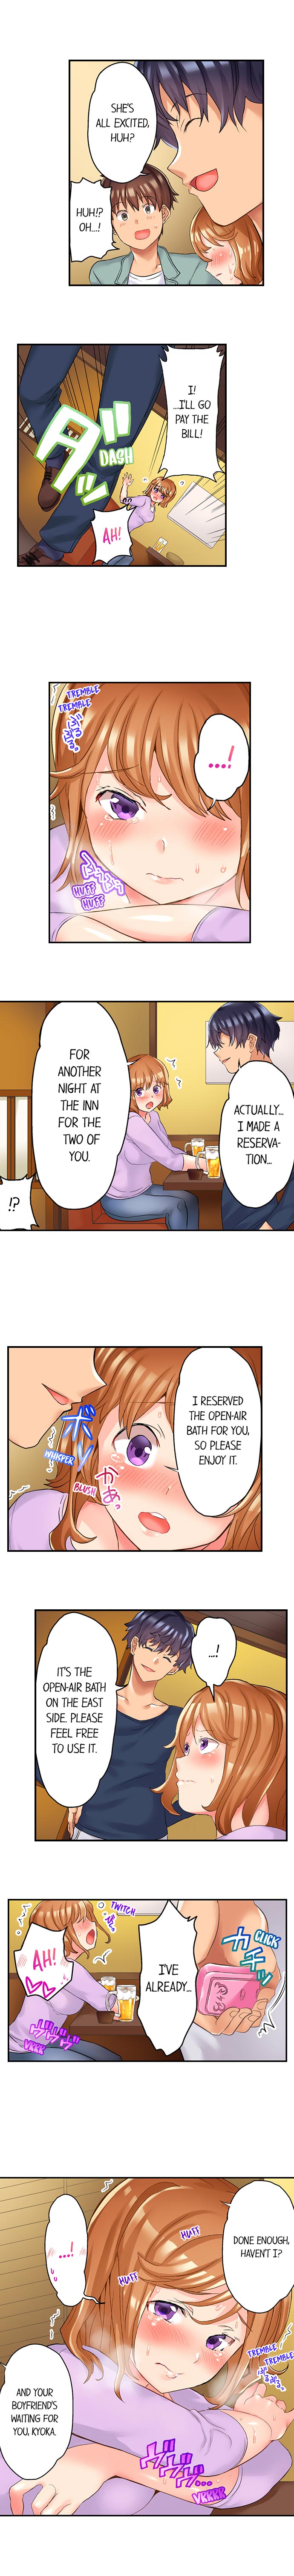 NTR Massage Chapter 8 - Page 2